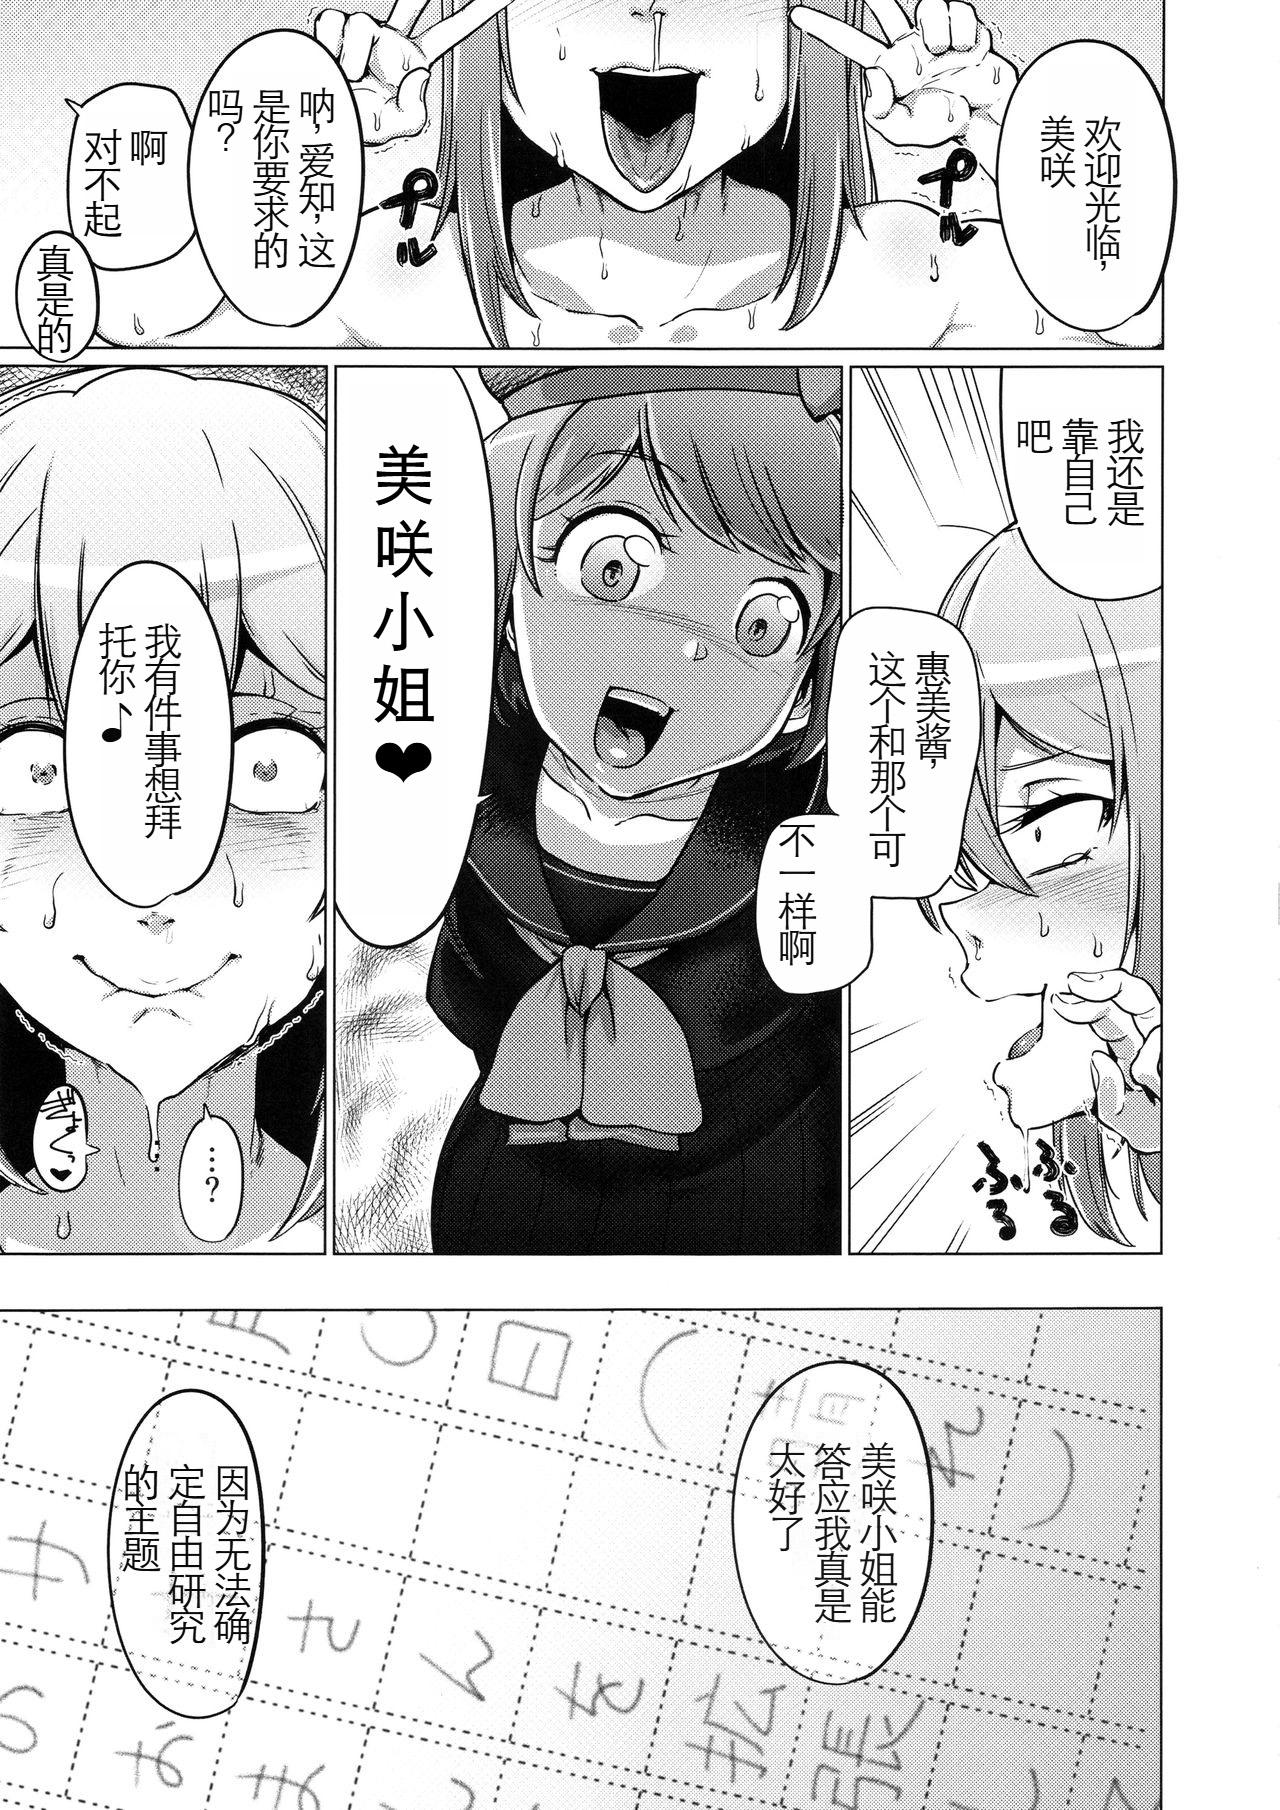 Clip Bind!! 4 - Cardfight vanguard Gang - Page 6